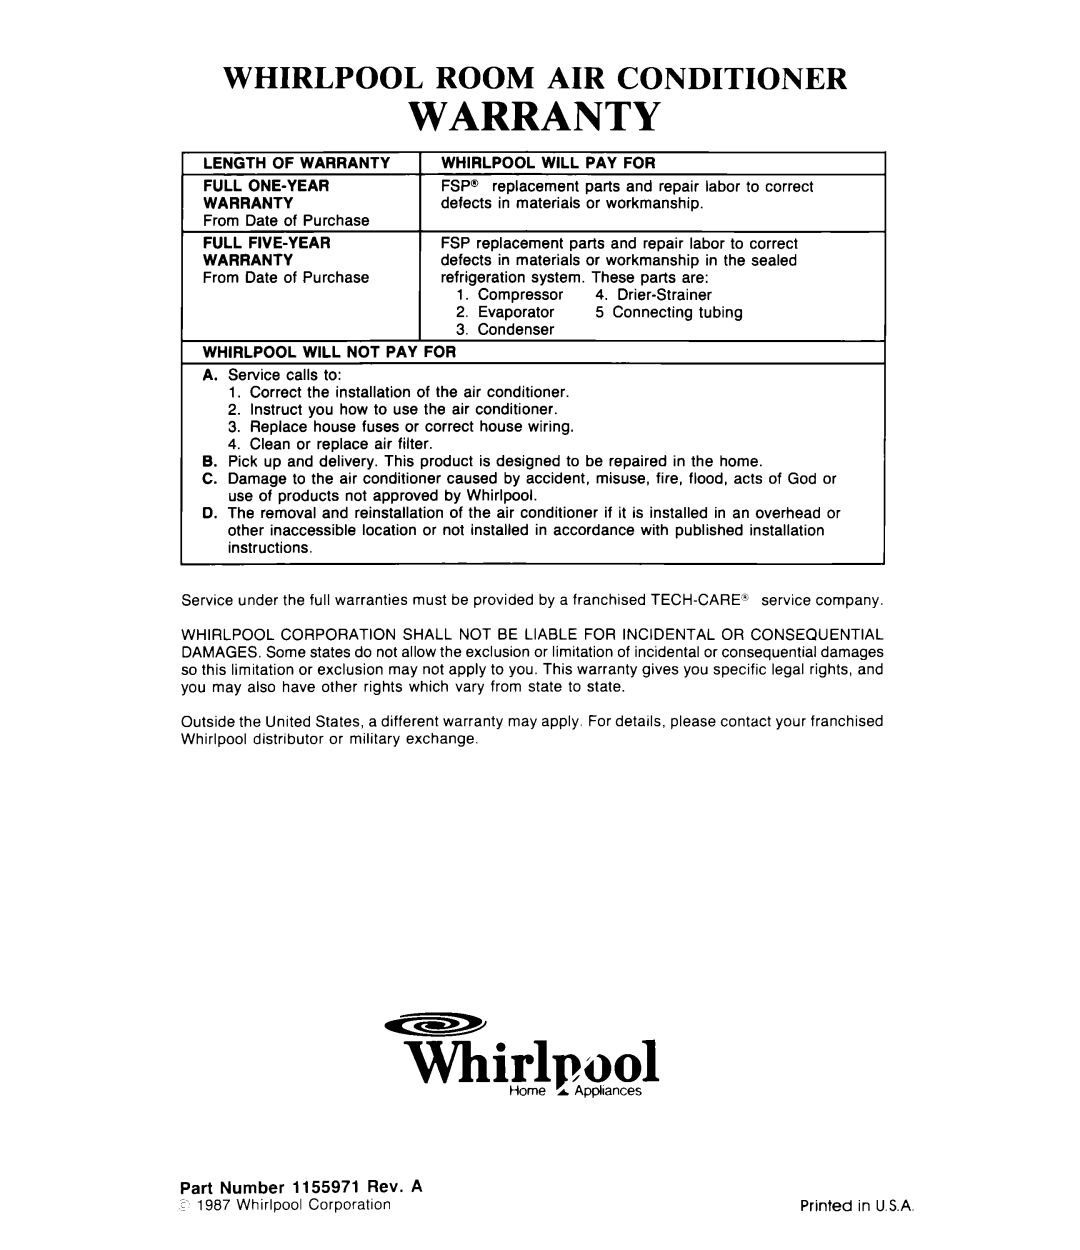 Whirlpool ACPS82, ACW082 manual Whirlpool Room Air Conditioner, Warranty 